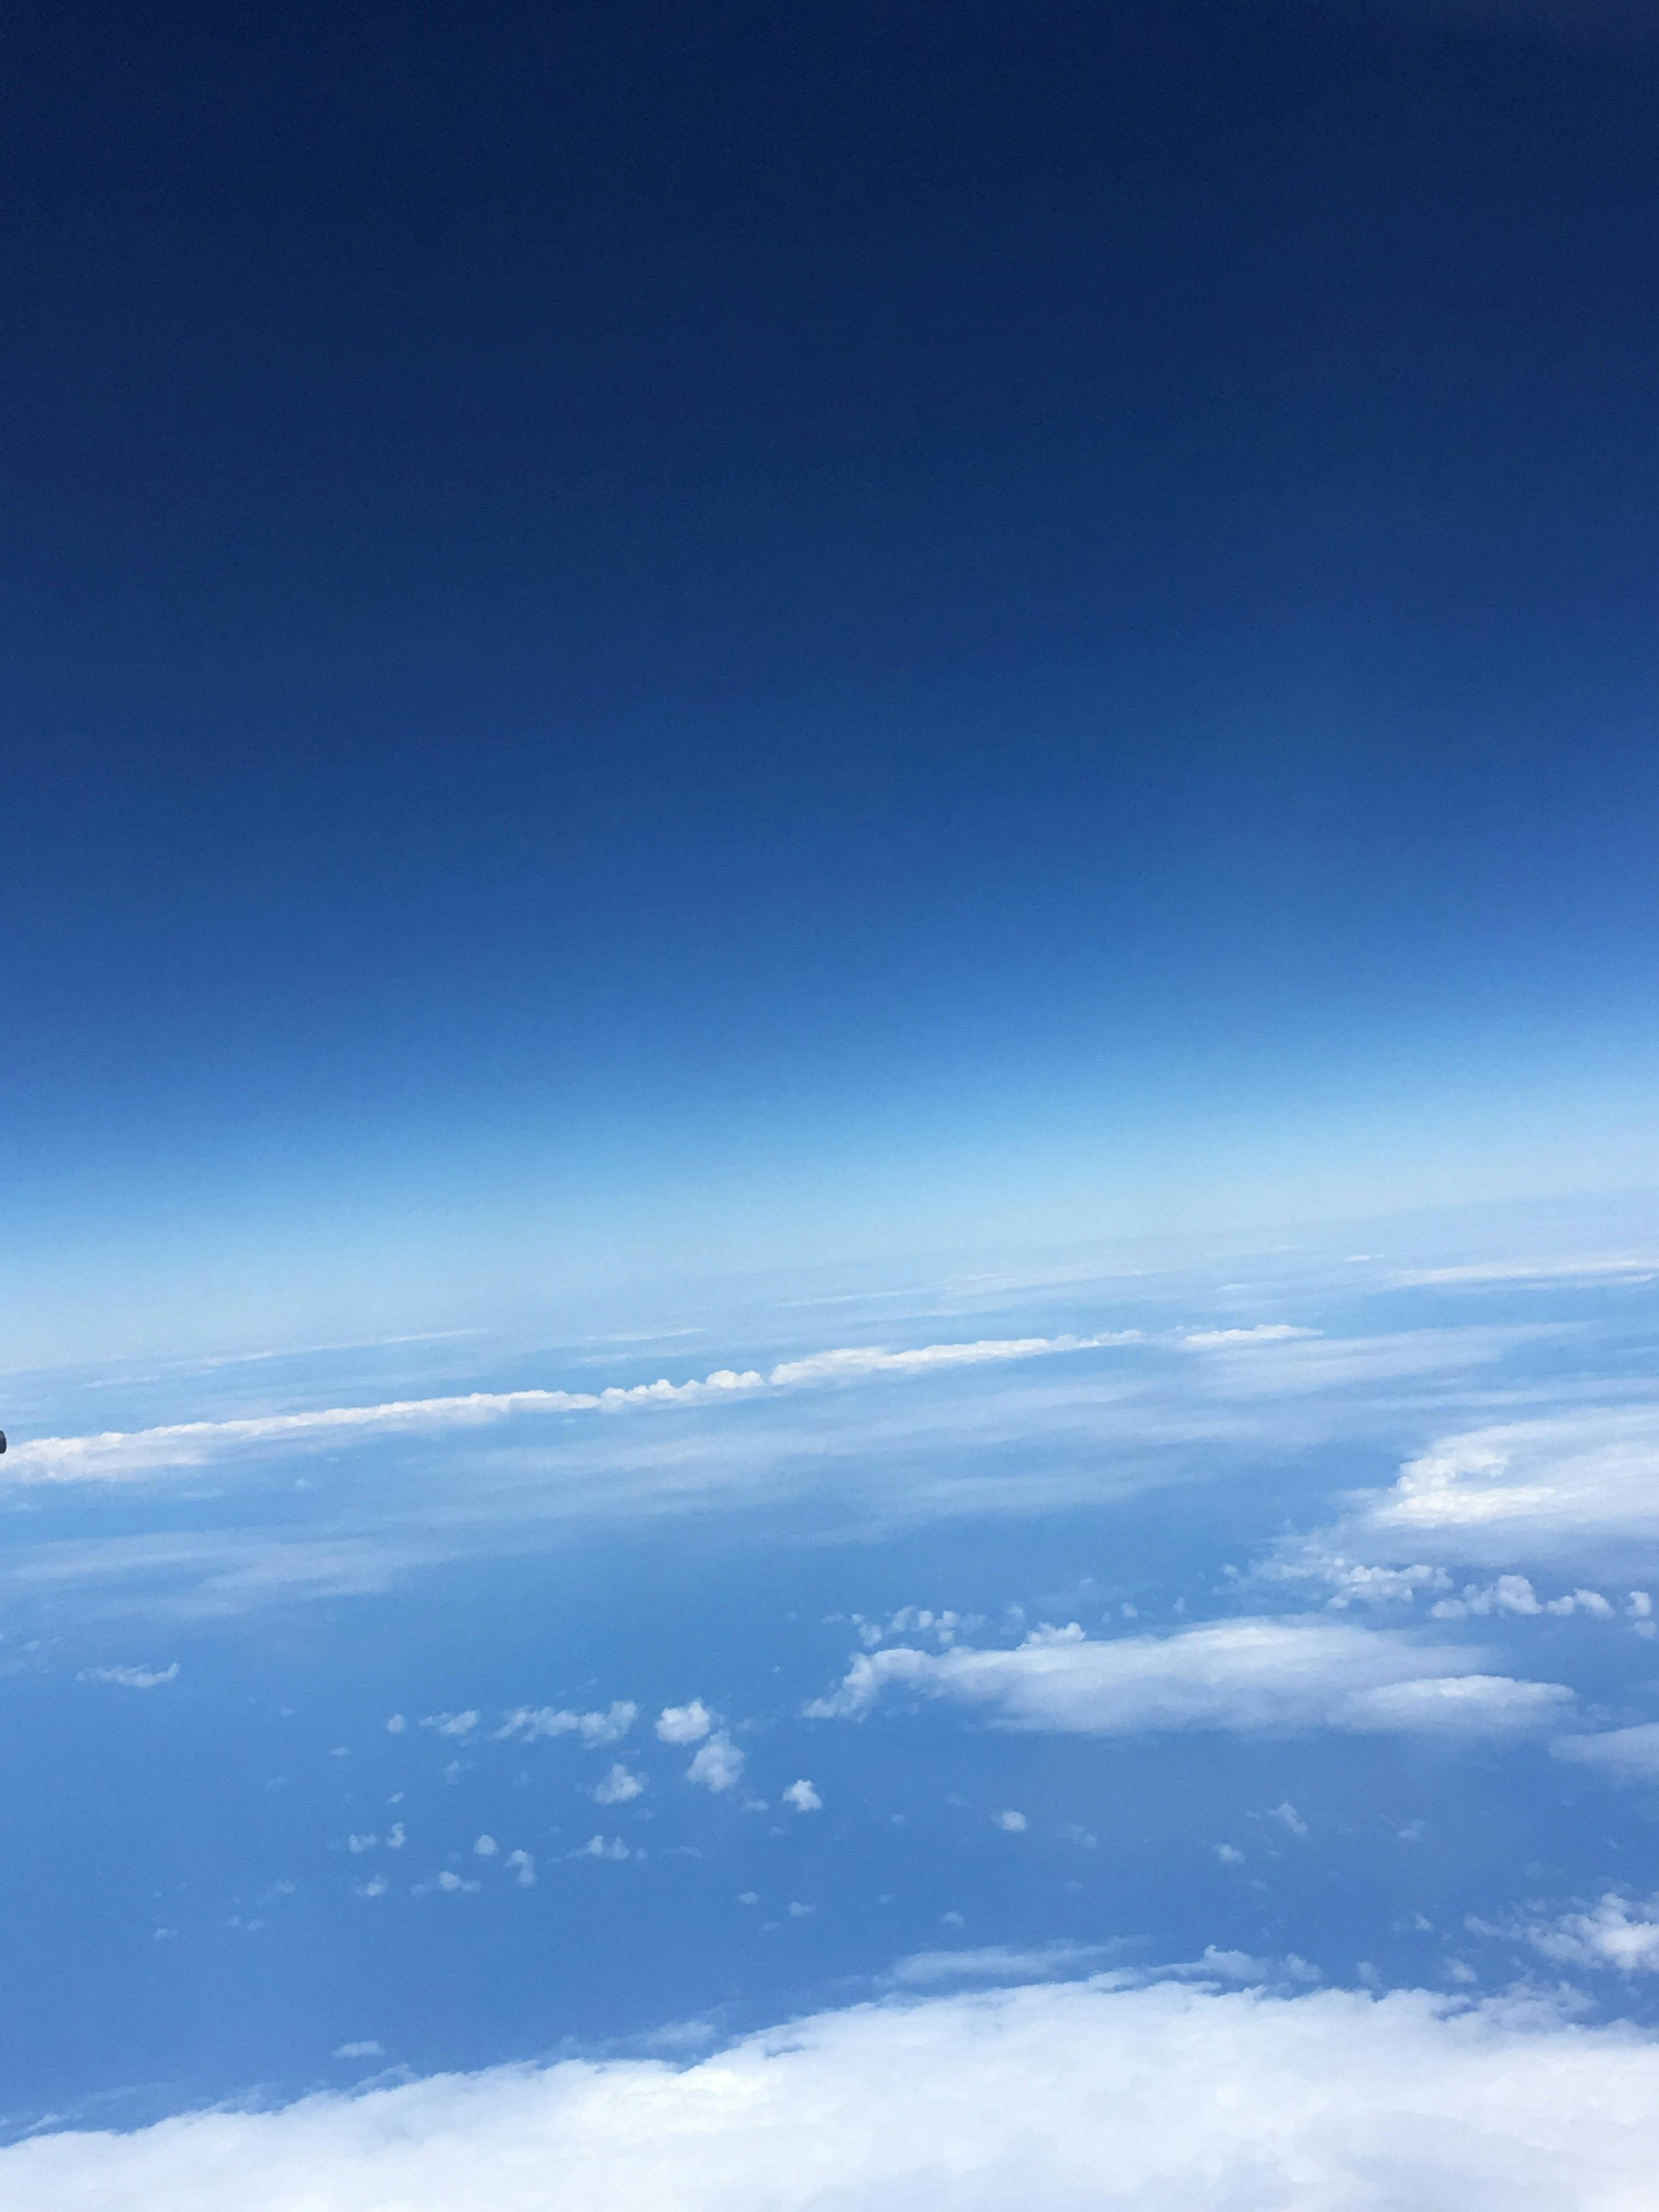 Free stock photo of airplane, clouds, pacific ocean